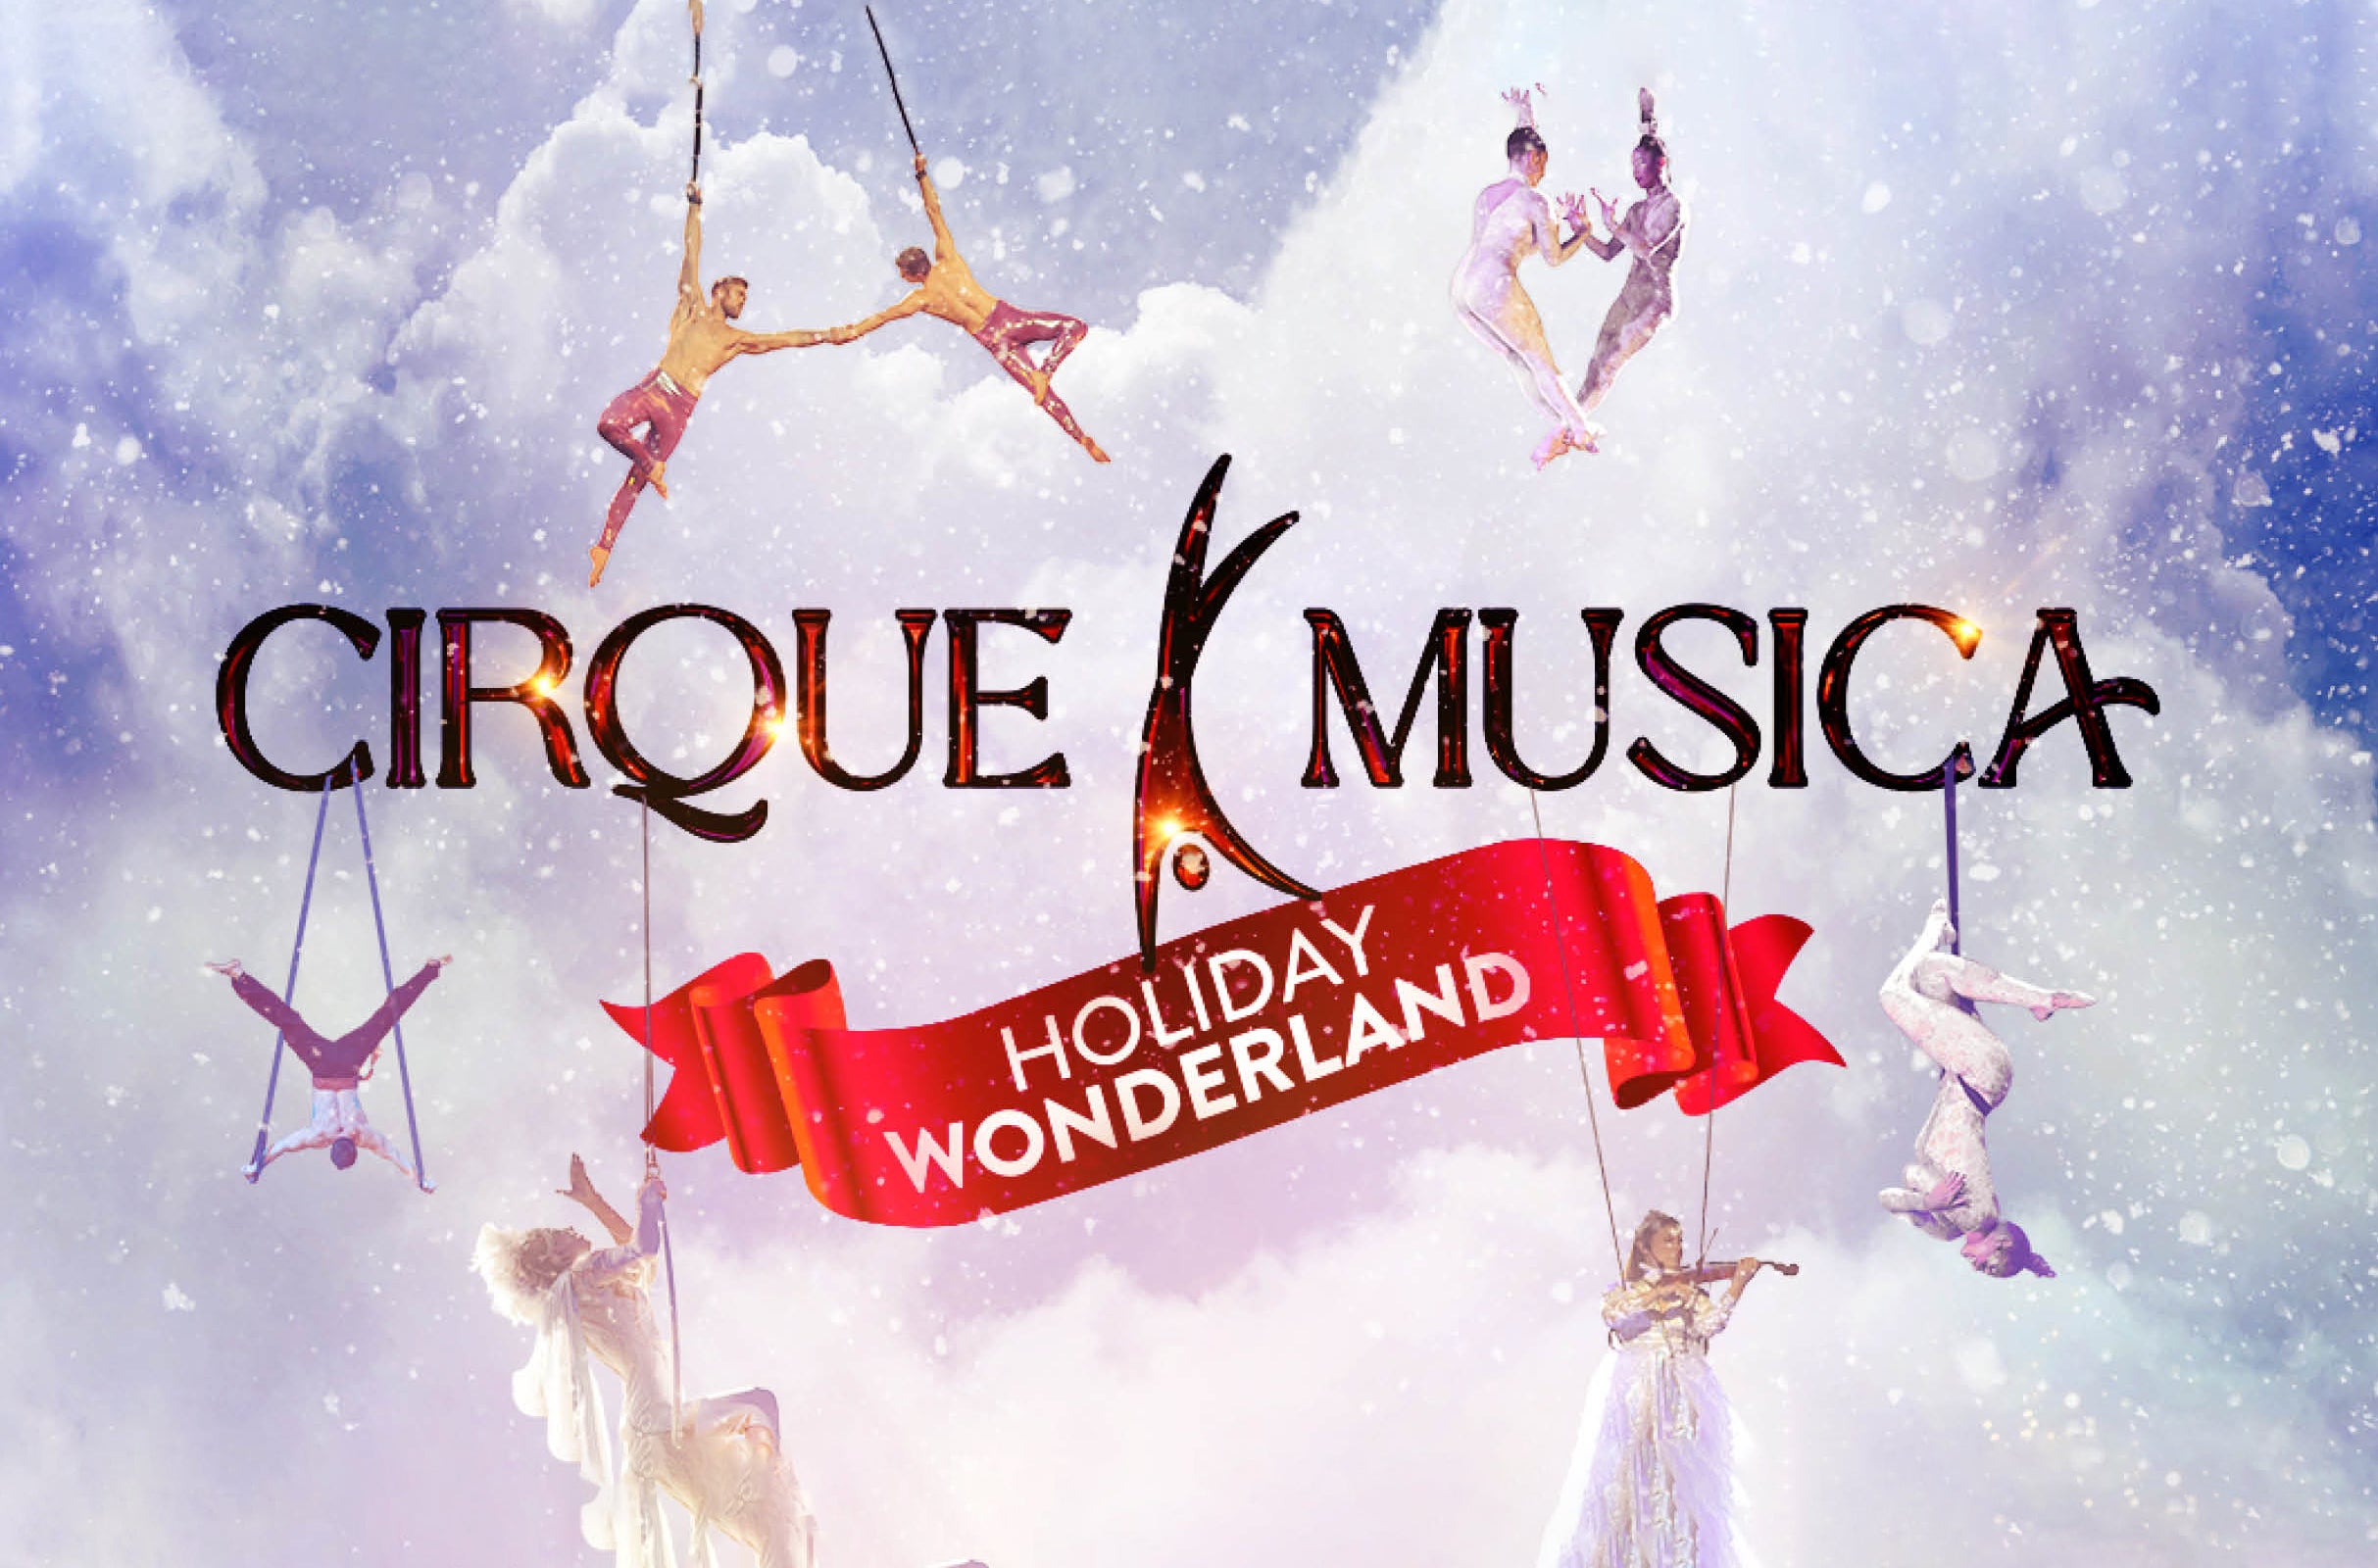 Cirque Musica Holiday Wonderland free presale password for early tickets in Winnipeg